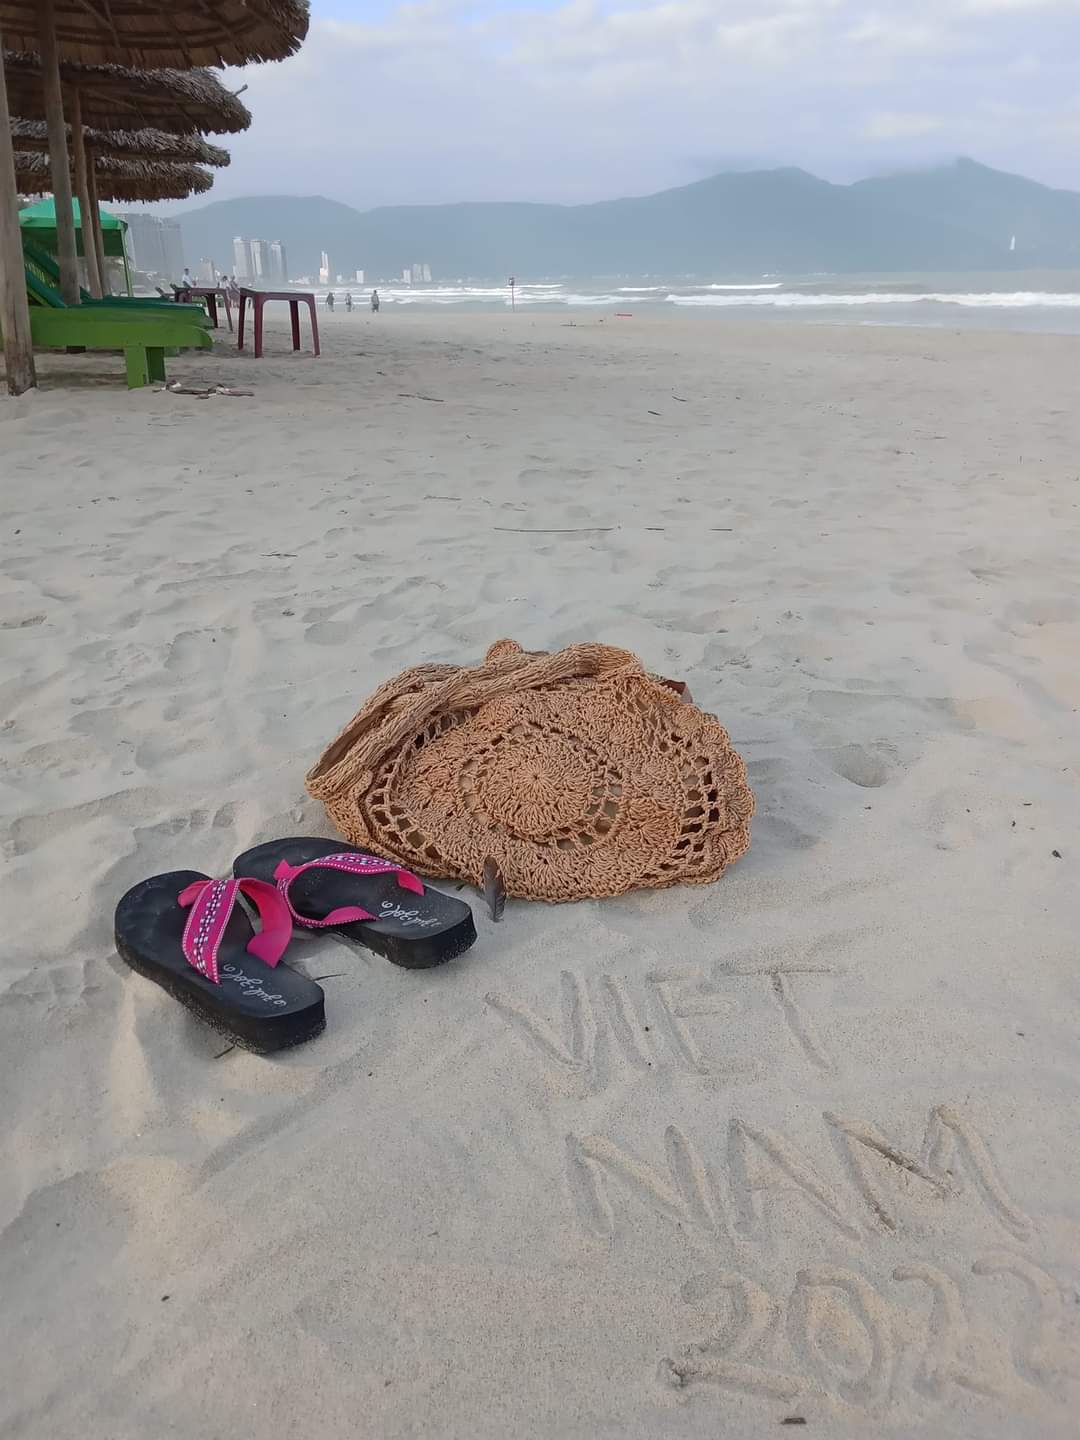 Woven purse and flip flops on the sand of the beach in Da Nang, Vietnam